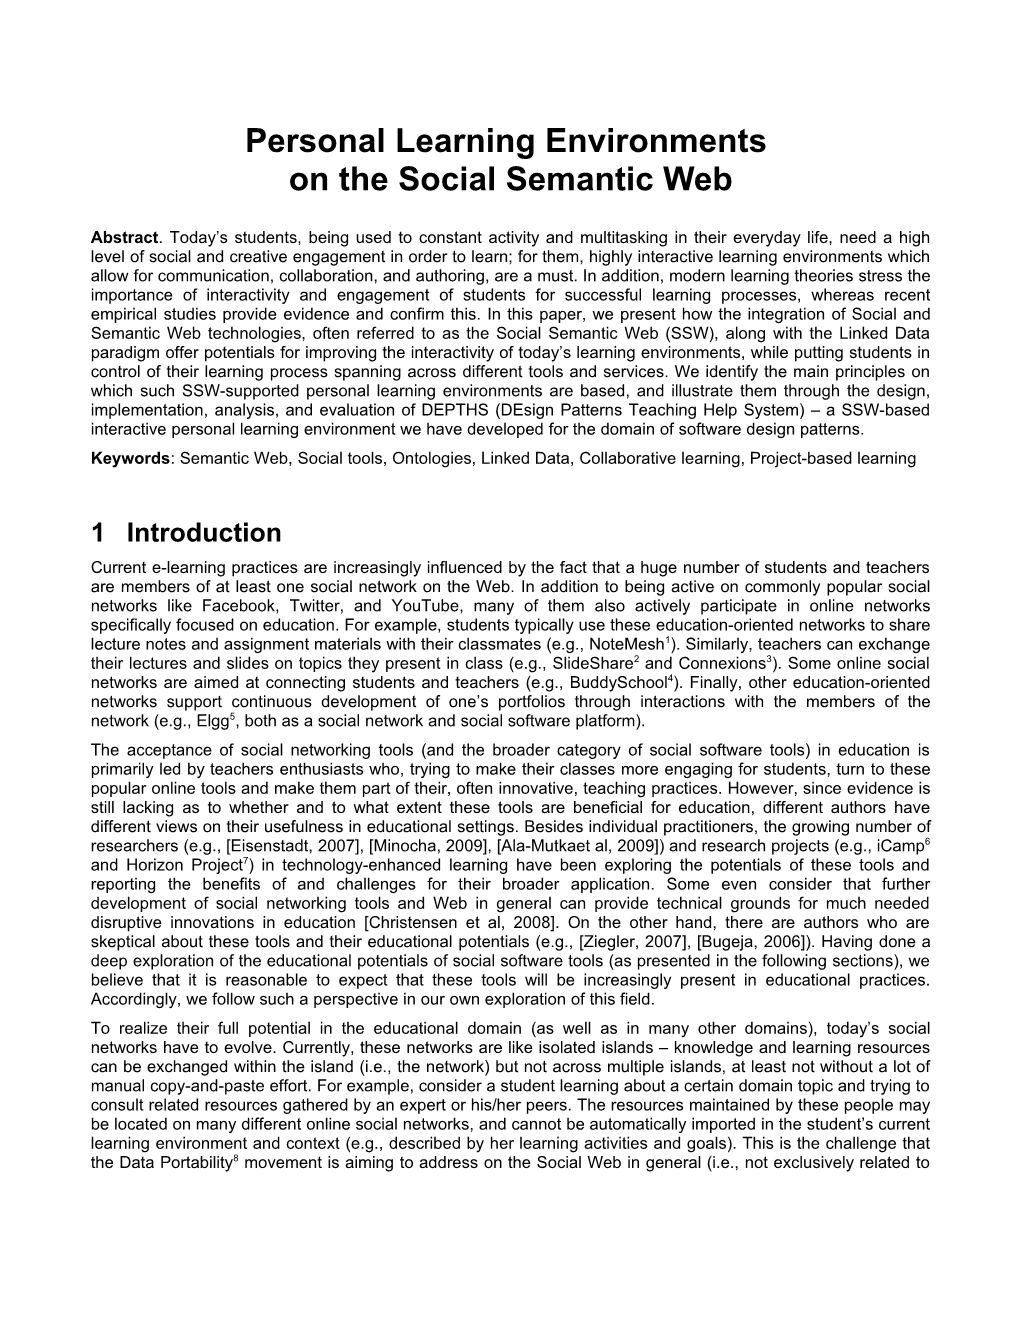 Personal Learning Environments on the Social Semantic Web